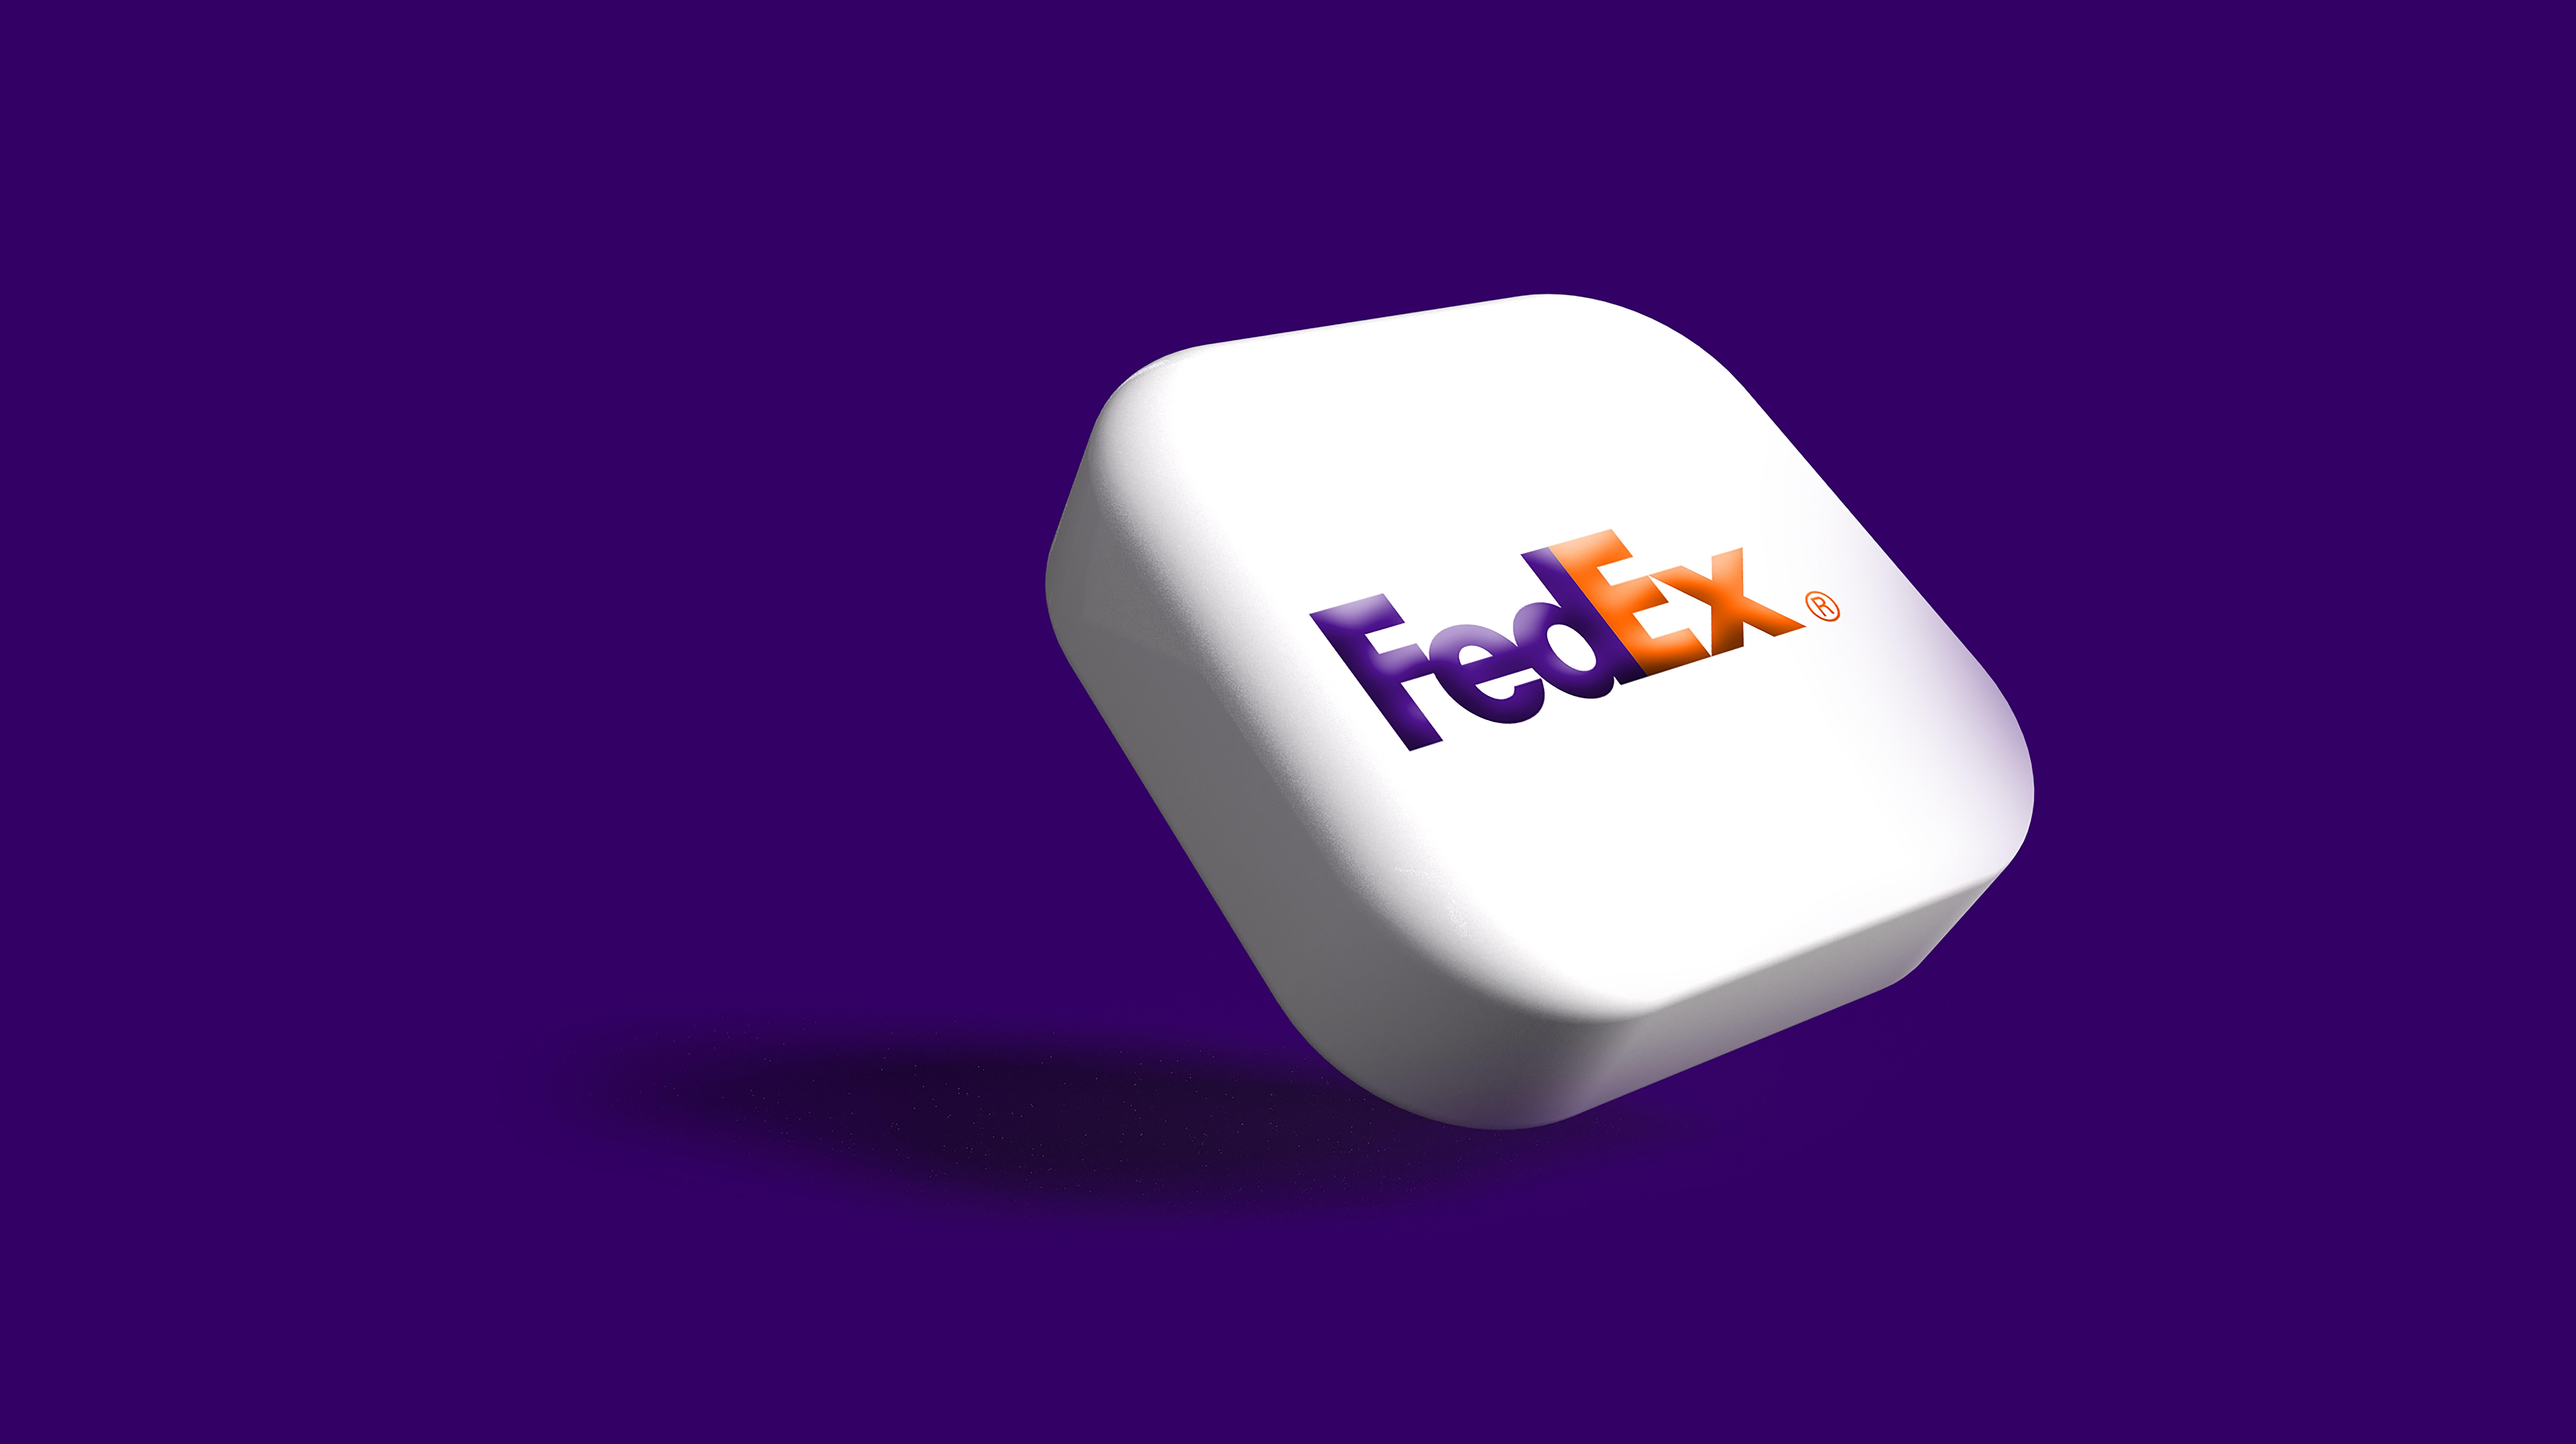 FedEx logo on a tablet-like graphic against a purple background.